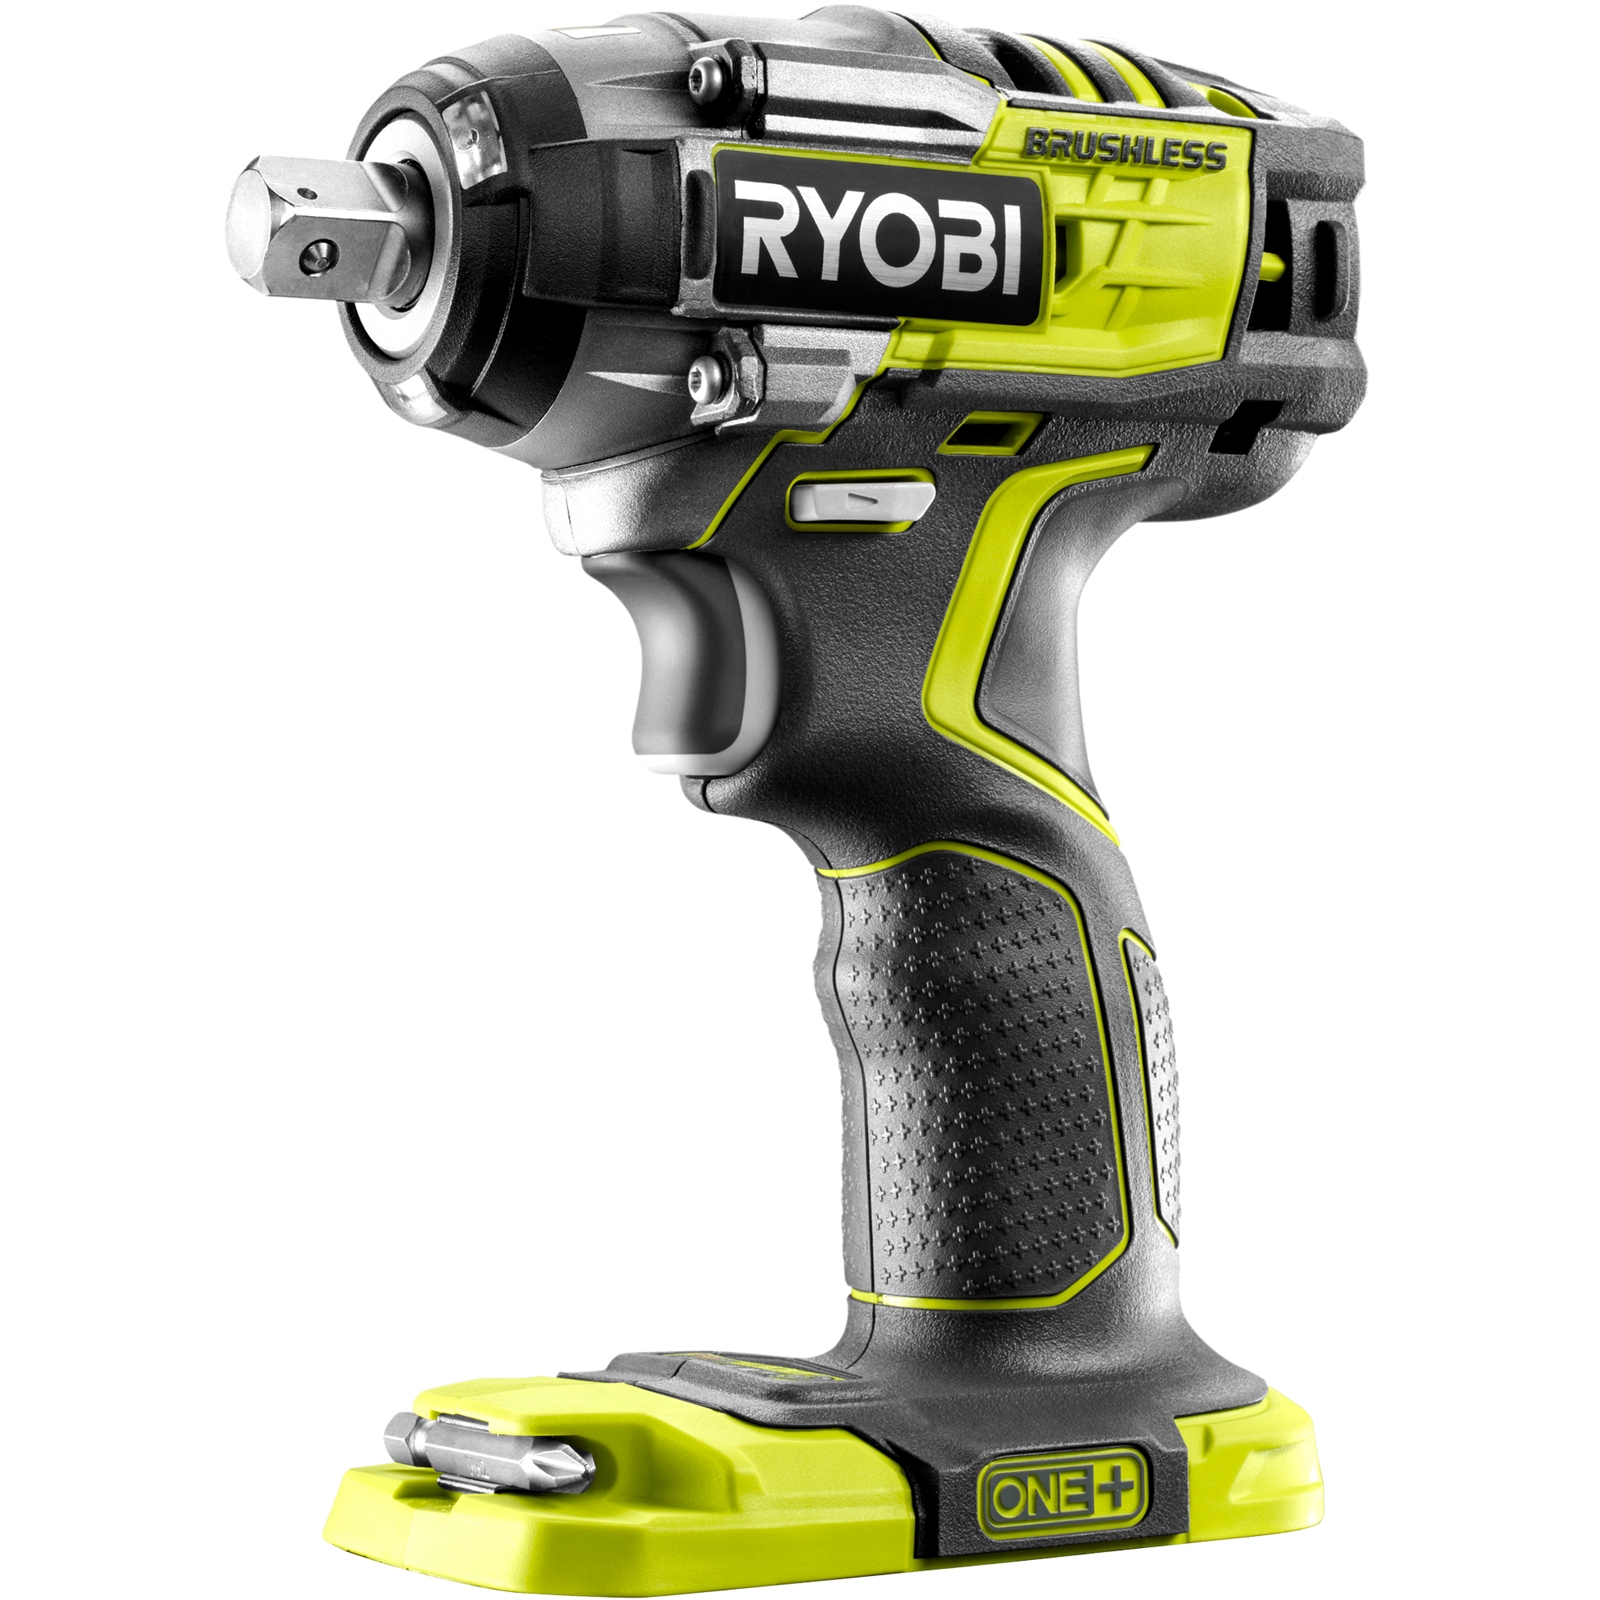 Ryobi R18IW7-H40P 18V Brushless Impact Wrench Spotted 